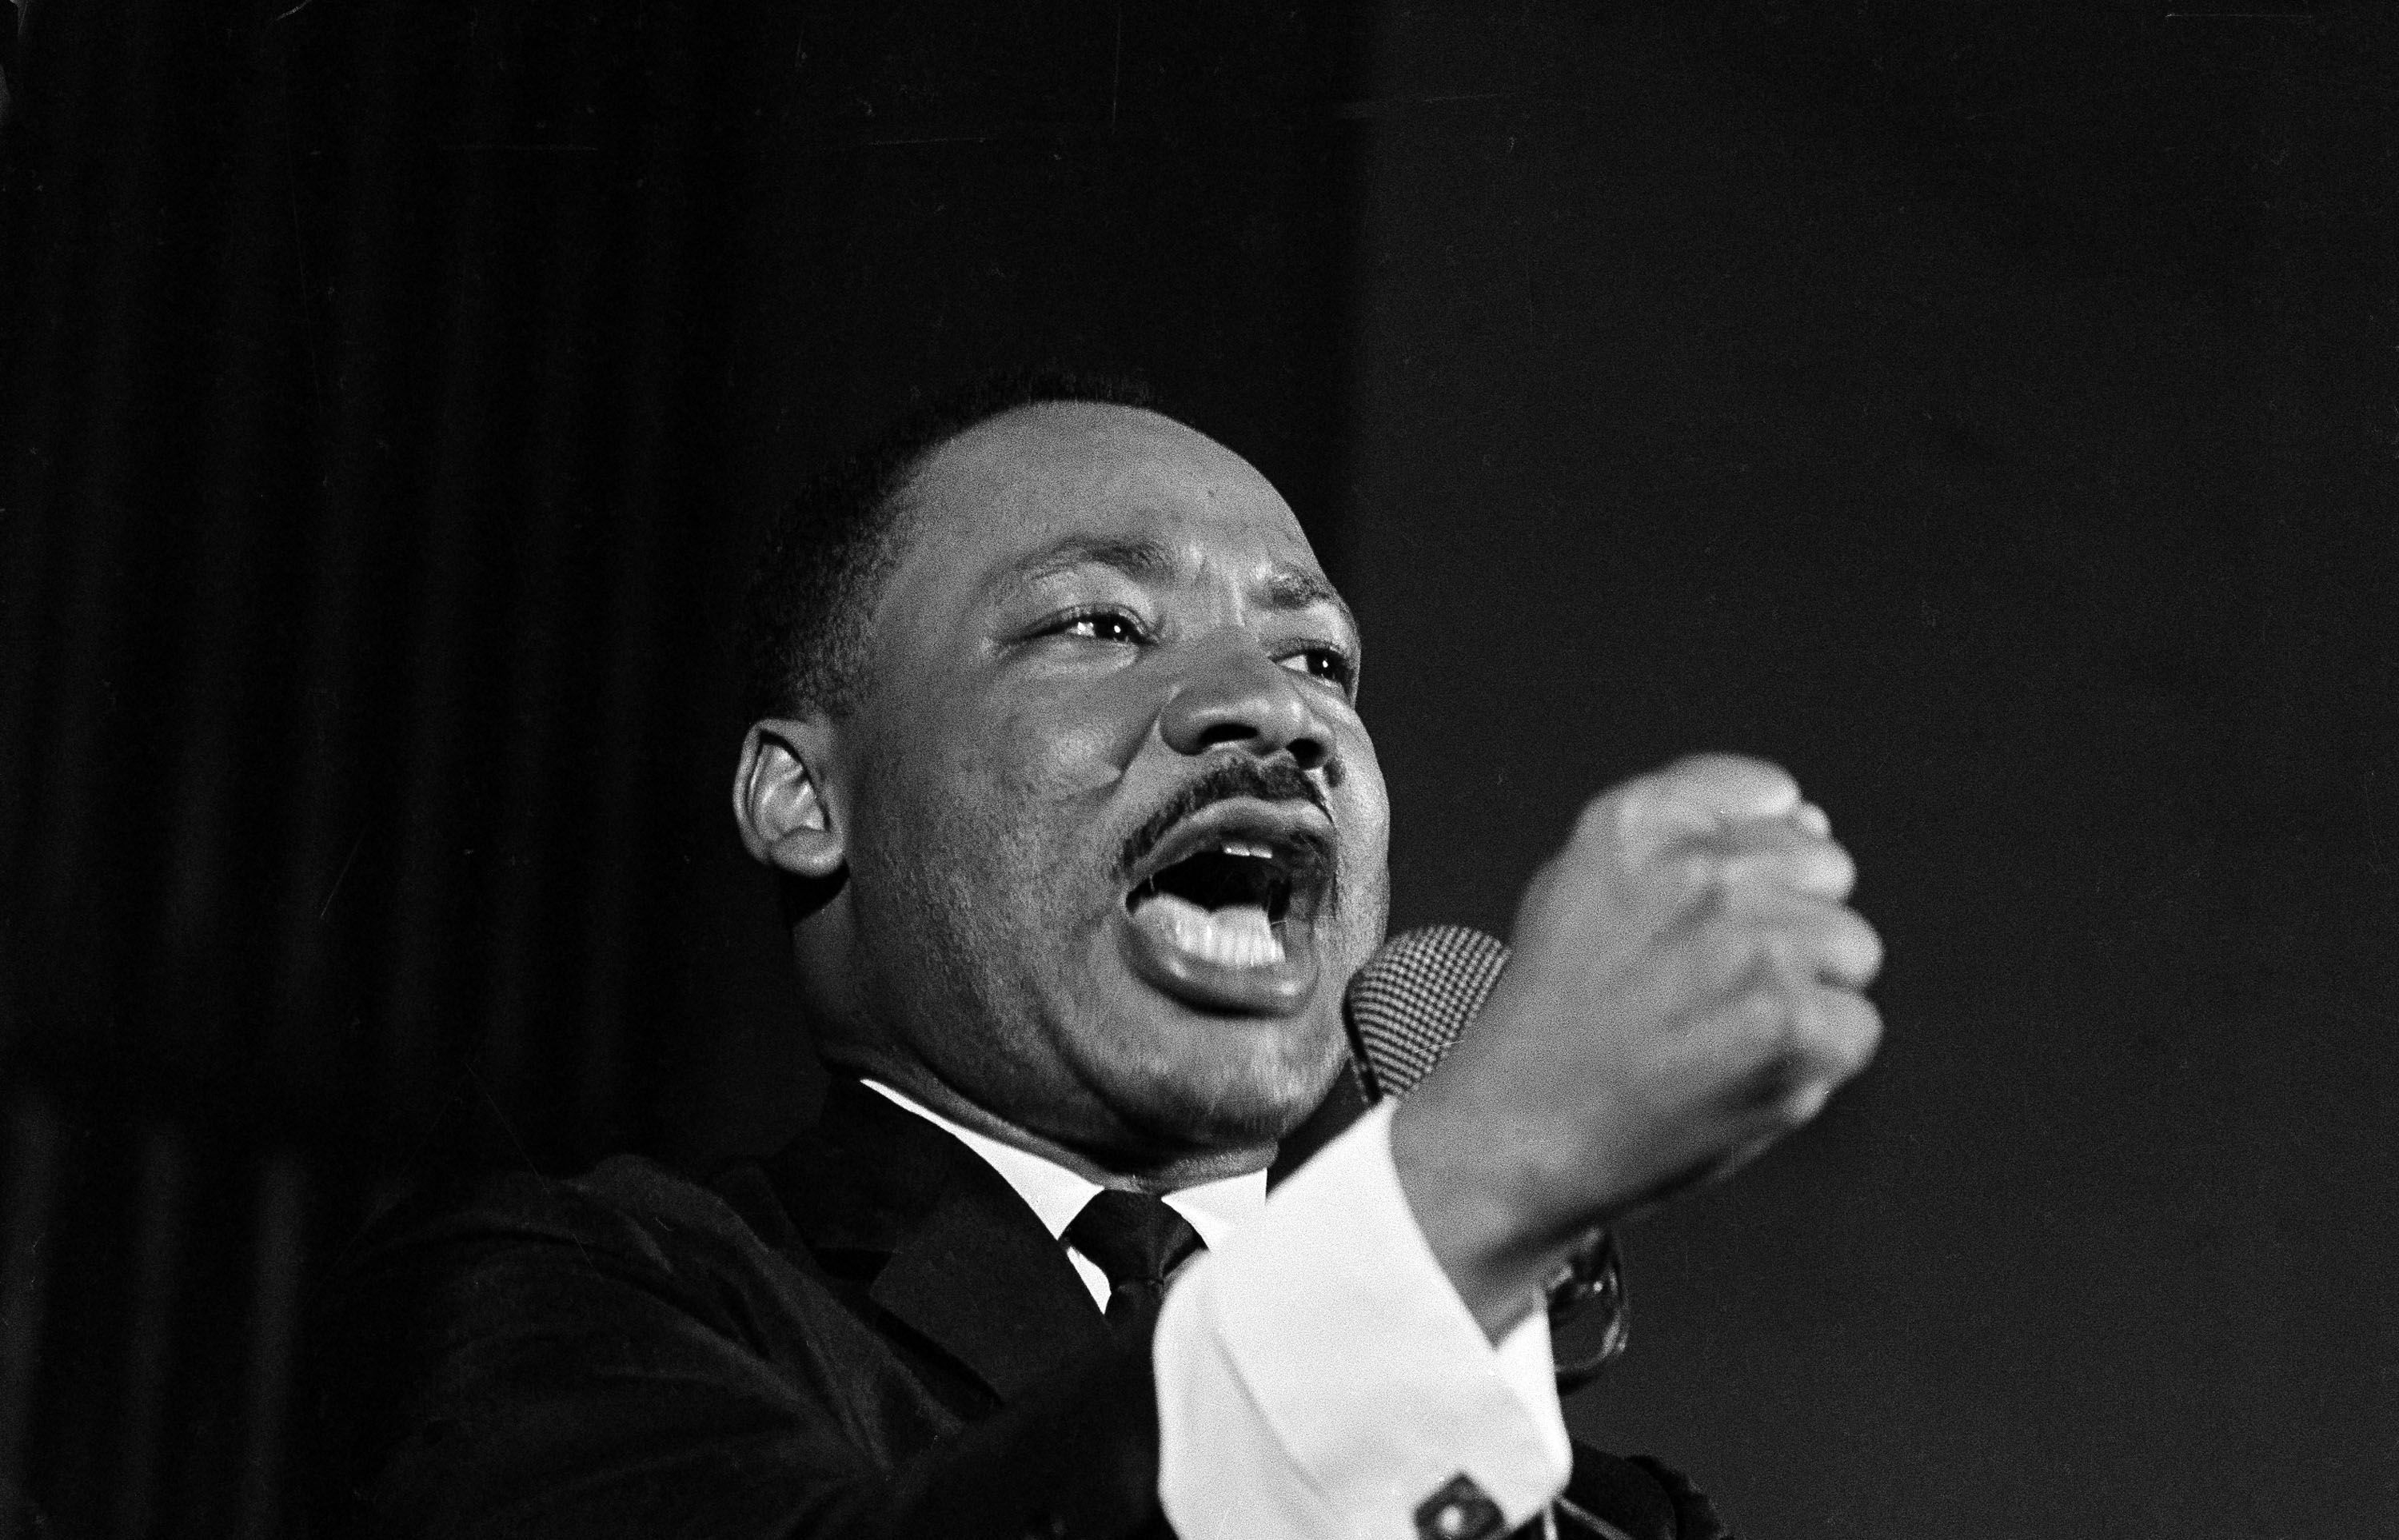 Martin Luther King, Jr., Biography, Speeches, Facts, & Assassination